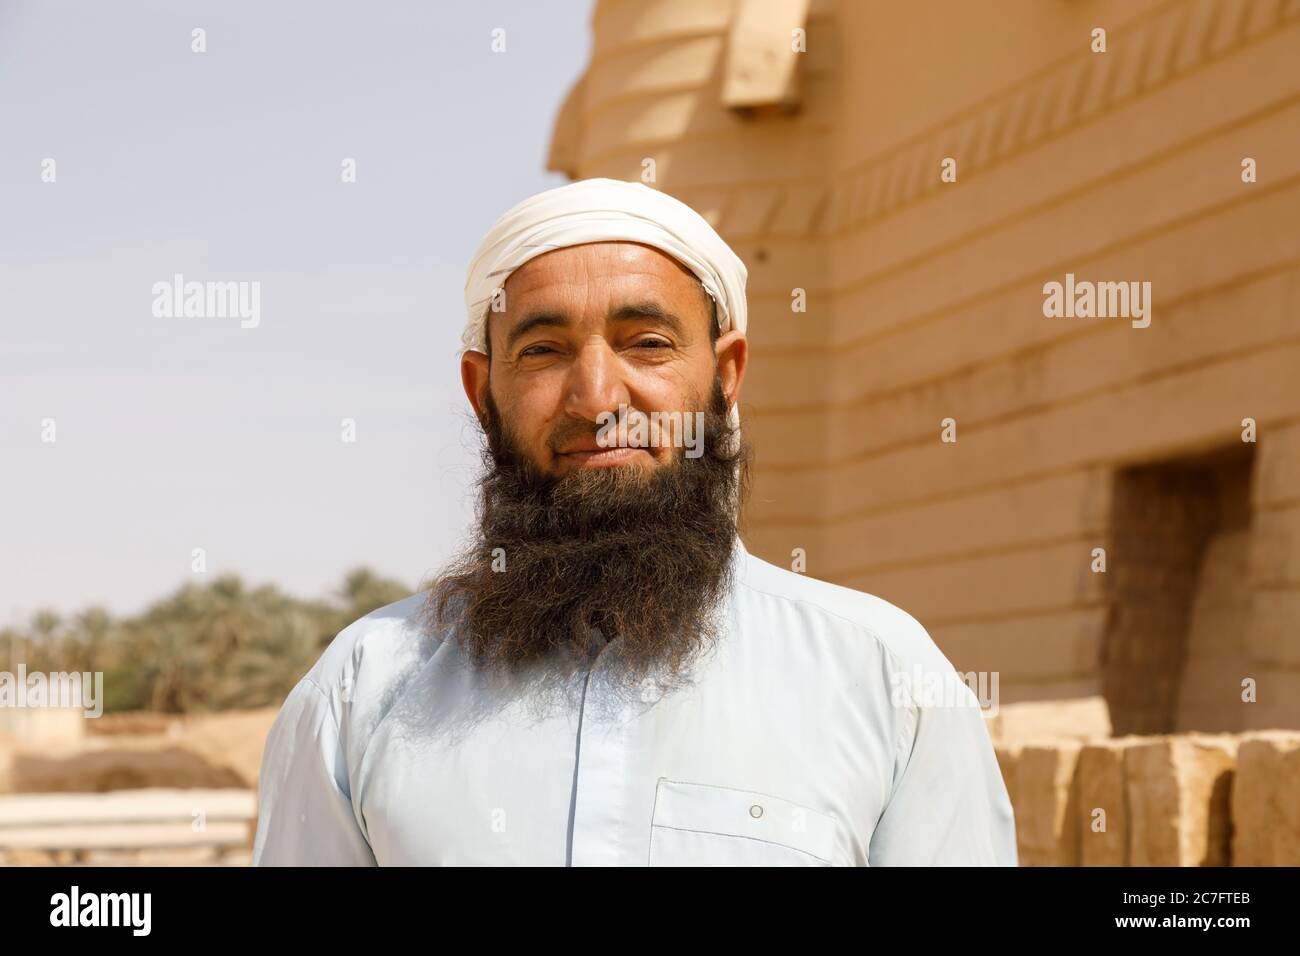 Raghba, Saudi Arabia, February 16 2020: A Muslim construction worker in Saudi Arabia with a traditional beard poses on his construction site. Stock Photo